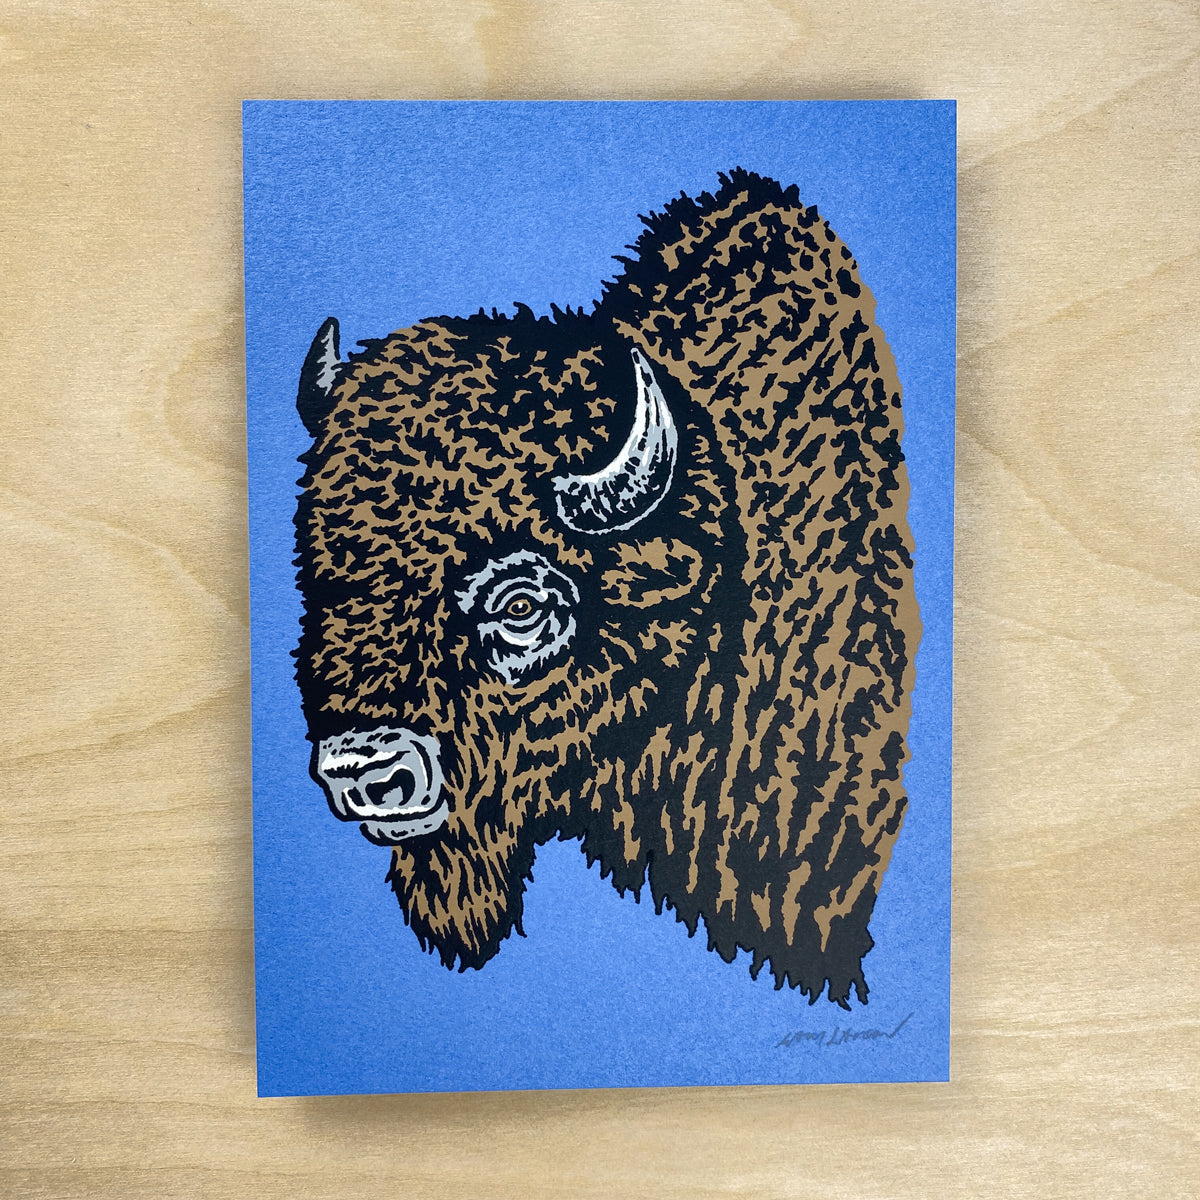 Colorado Bison - Signed 5x7in Print #225